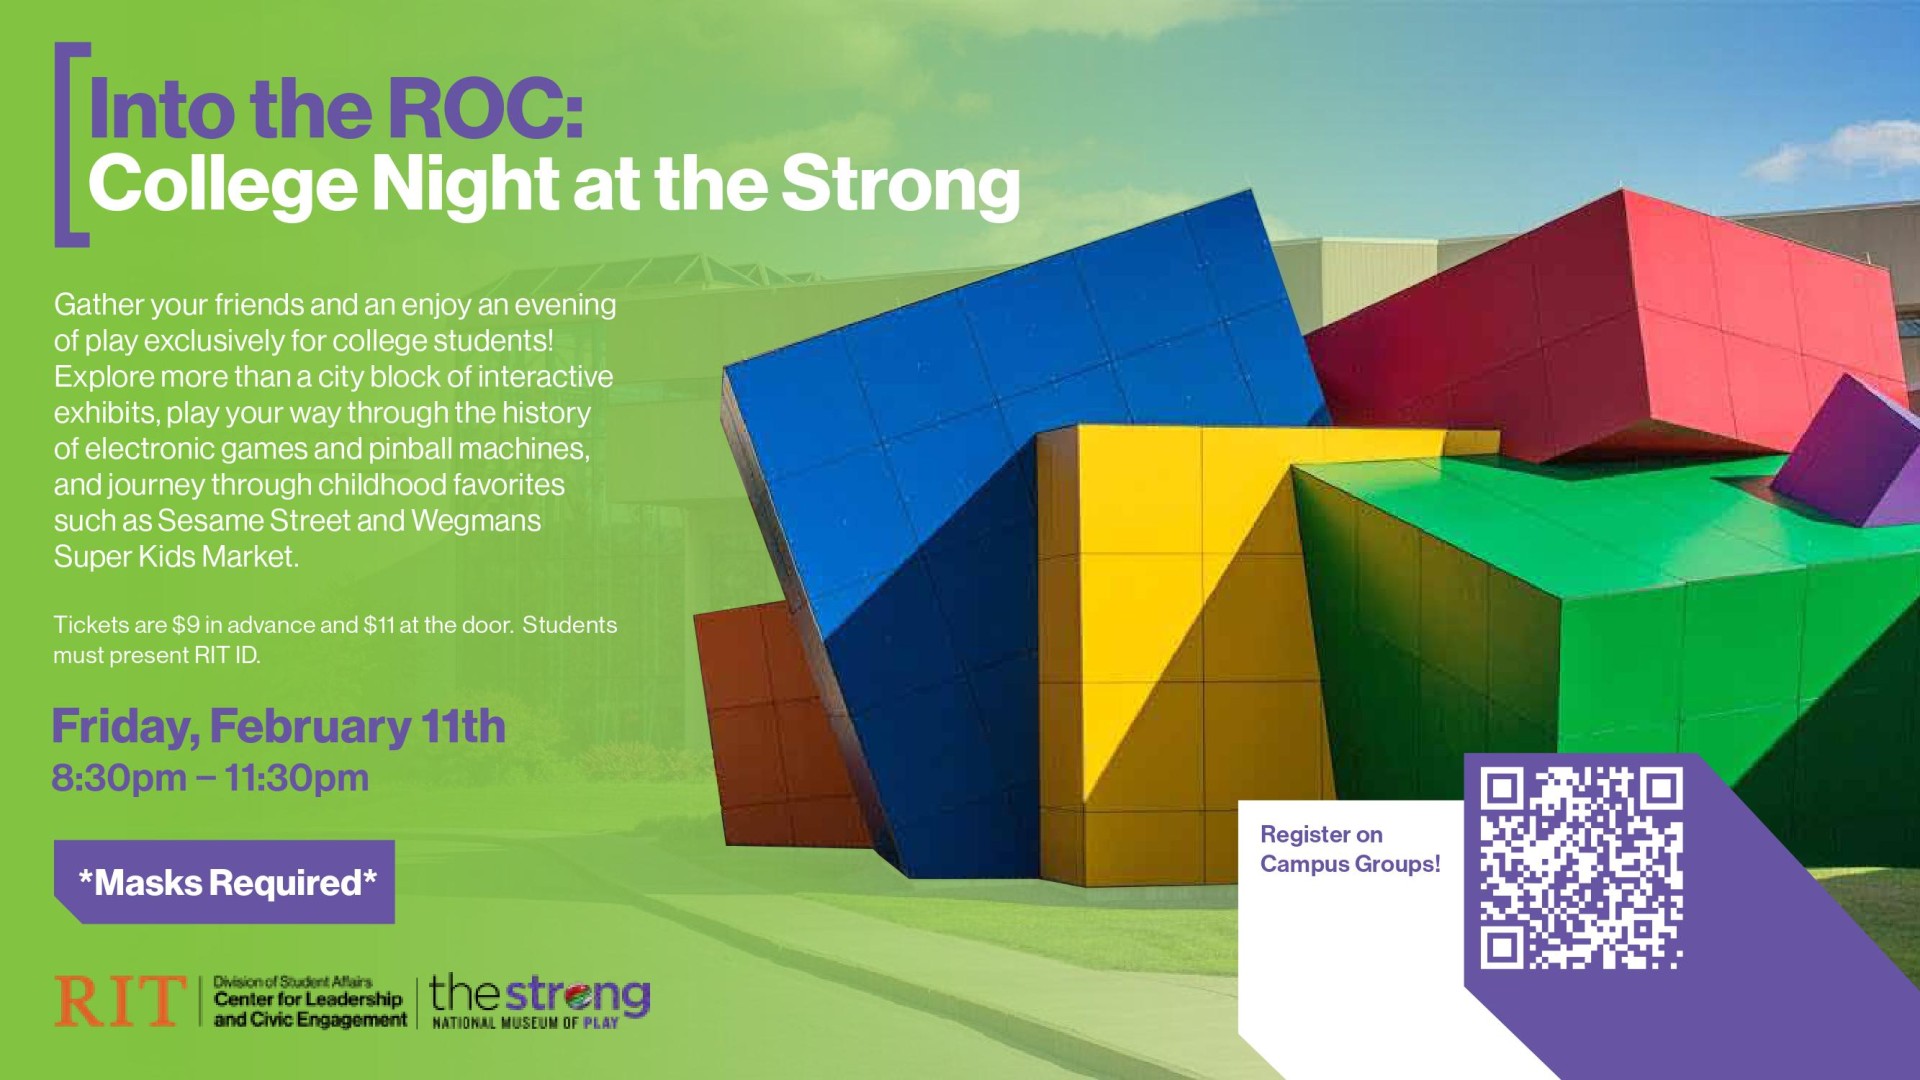 To the right of the image are the multiple, large colored blocks that compose the exterior of the Strong Museum of Play. The blocks are red, green, yellow, and blue. In the bottom right of the image inside a purple rectangle is  a QR code to register for the event on CampusGroups. To the left of the image, written on a green background, is the information about the event. In the bottom left of the image are the graphics for the Strong Museum and the Center for leadership & Civic Engagement.